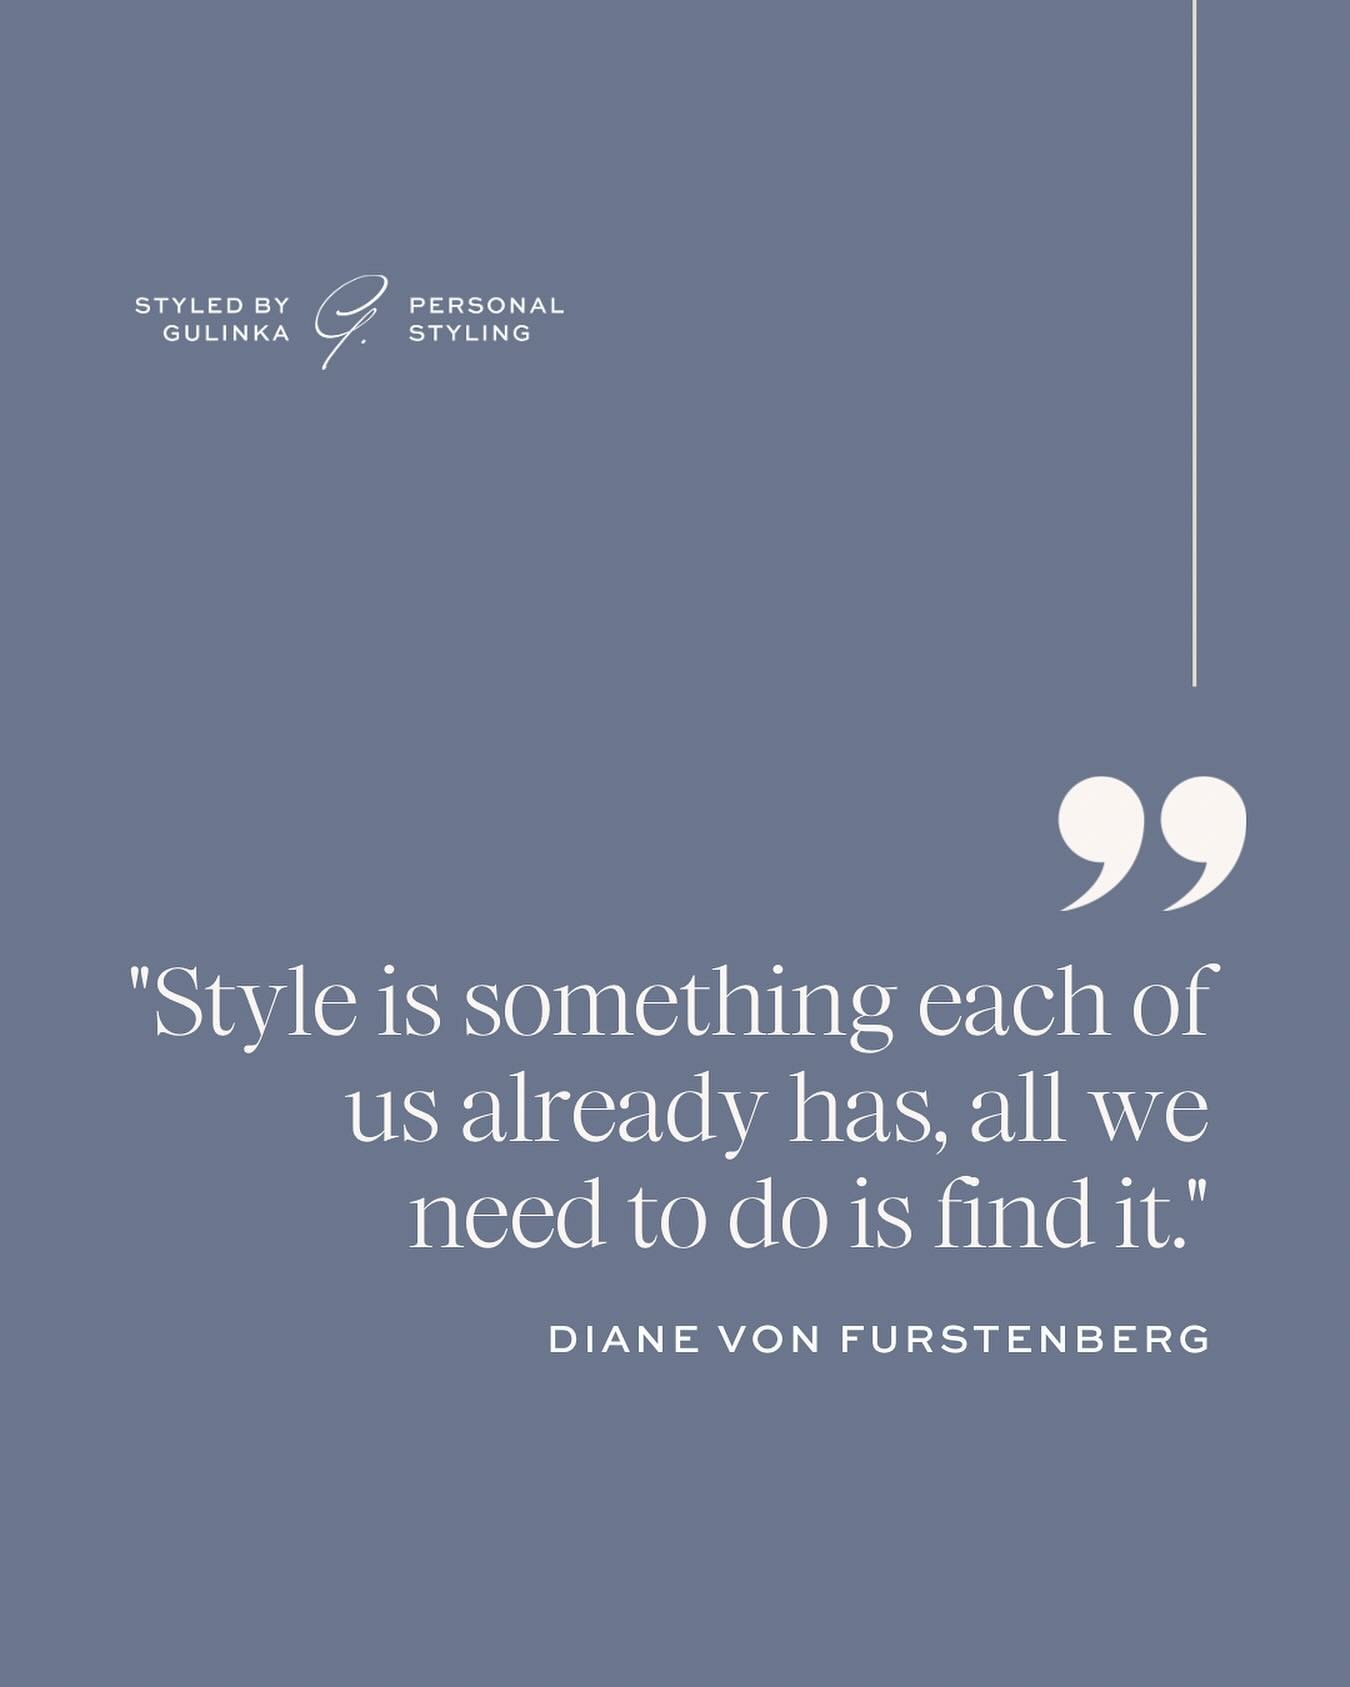 And finding it is the greatest joy 💛

#stylequote #styleinspiration #stylemantra #personalstyle